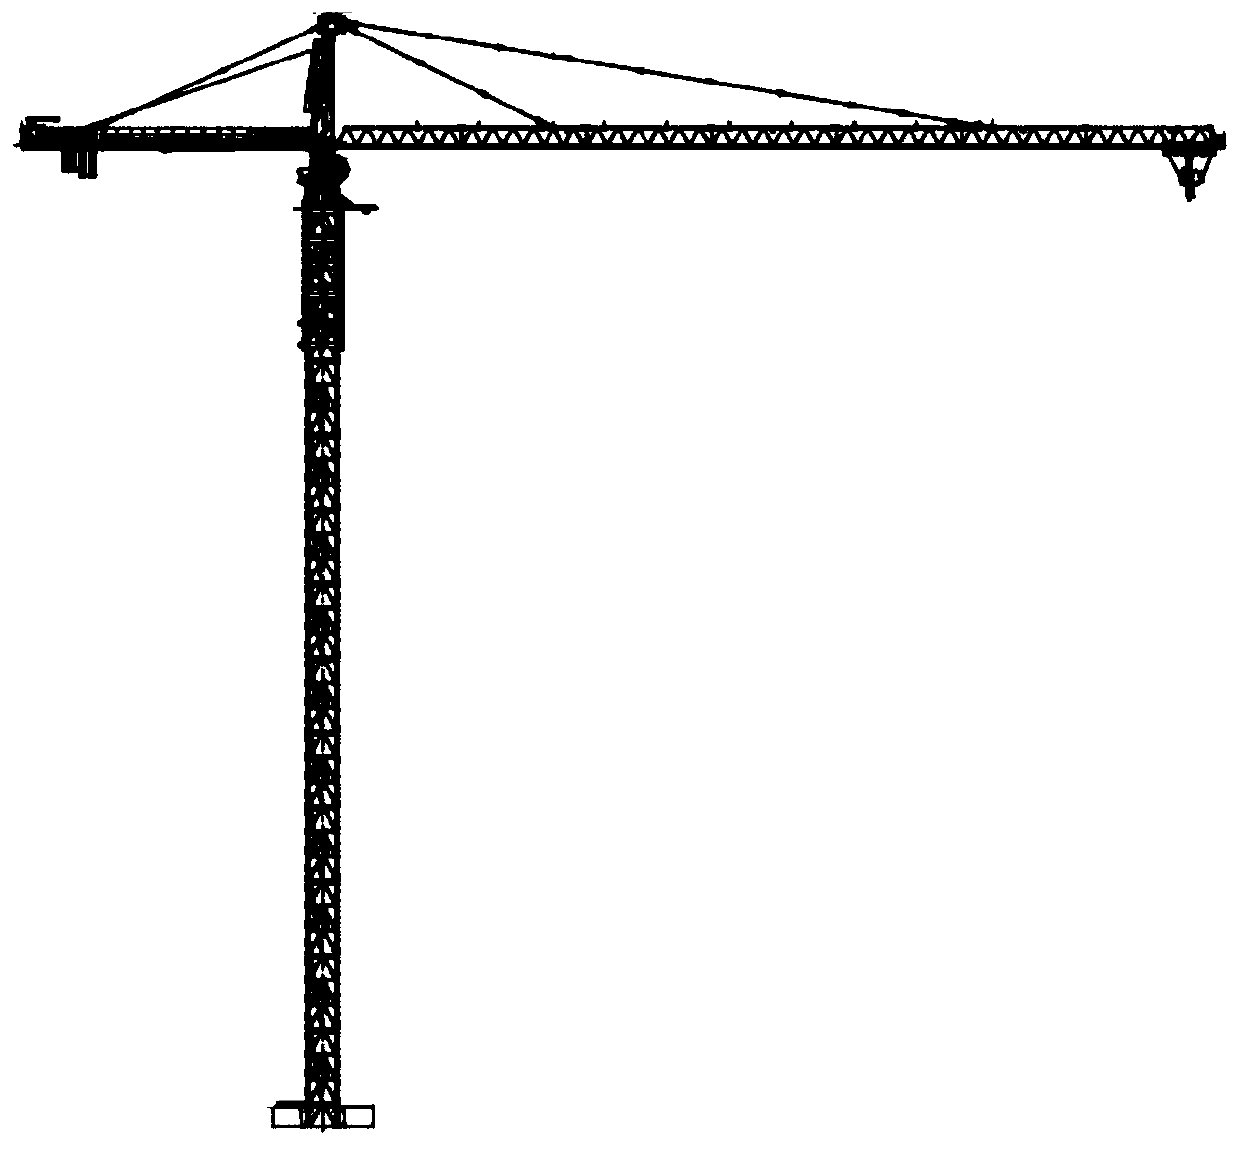 Variable cross section truss type tower crane overlength adhesion construction method